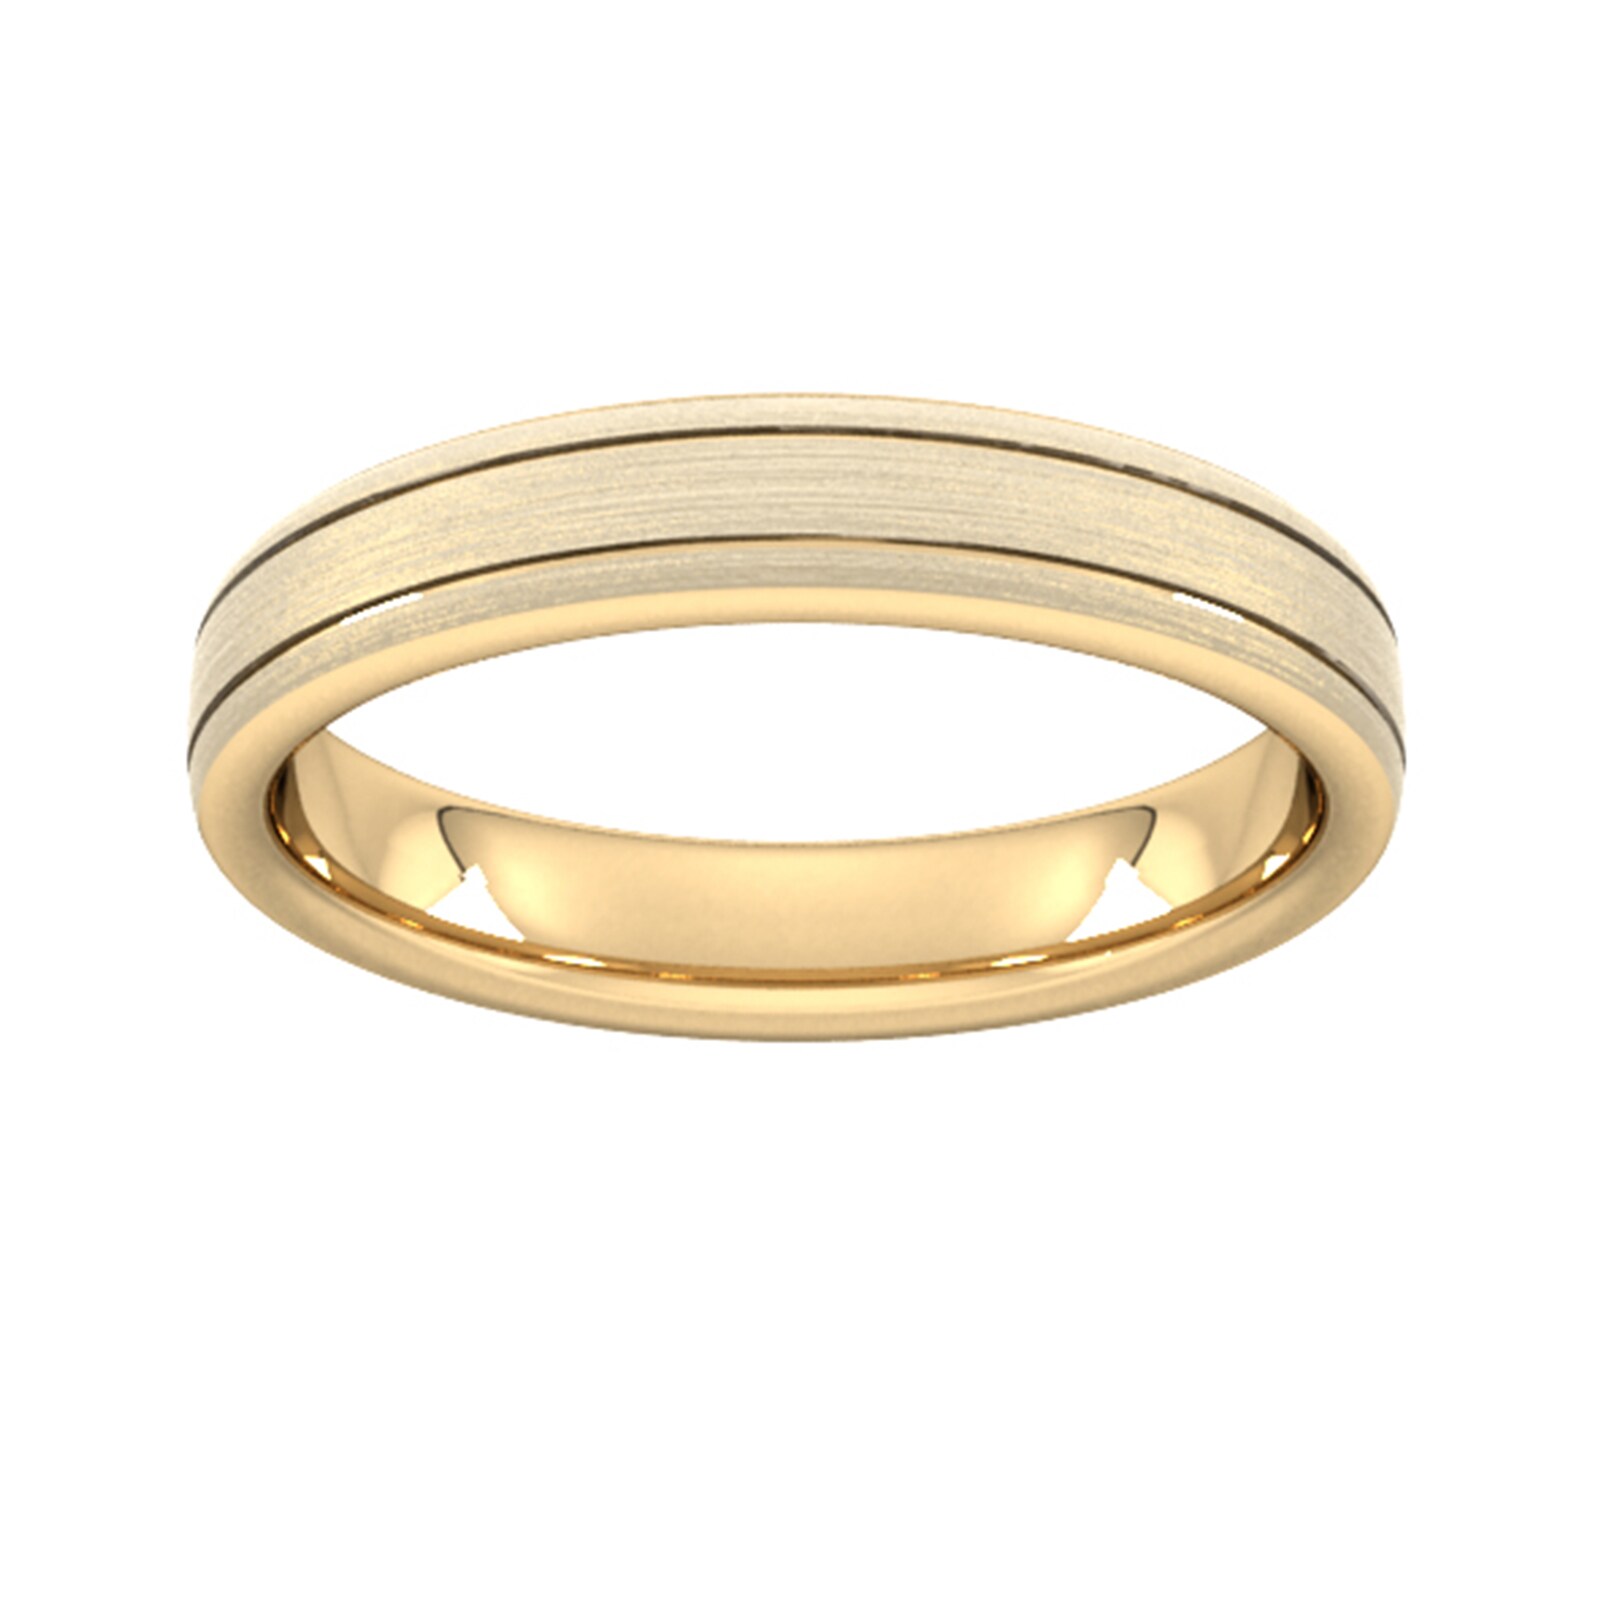 4mm D Shape Heavy Matt Finish With Double Grooves Wedding Ring In 9 Carat Yellow Gold - Ring Size U